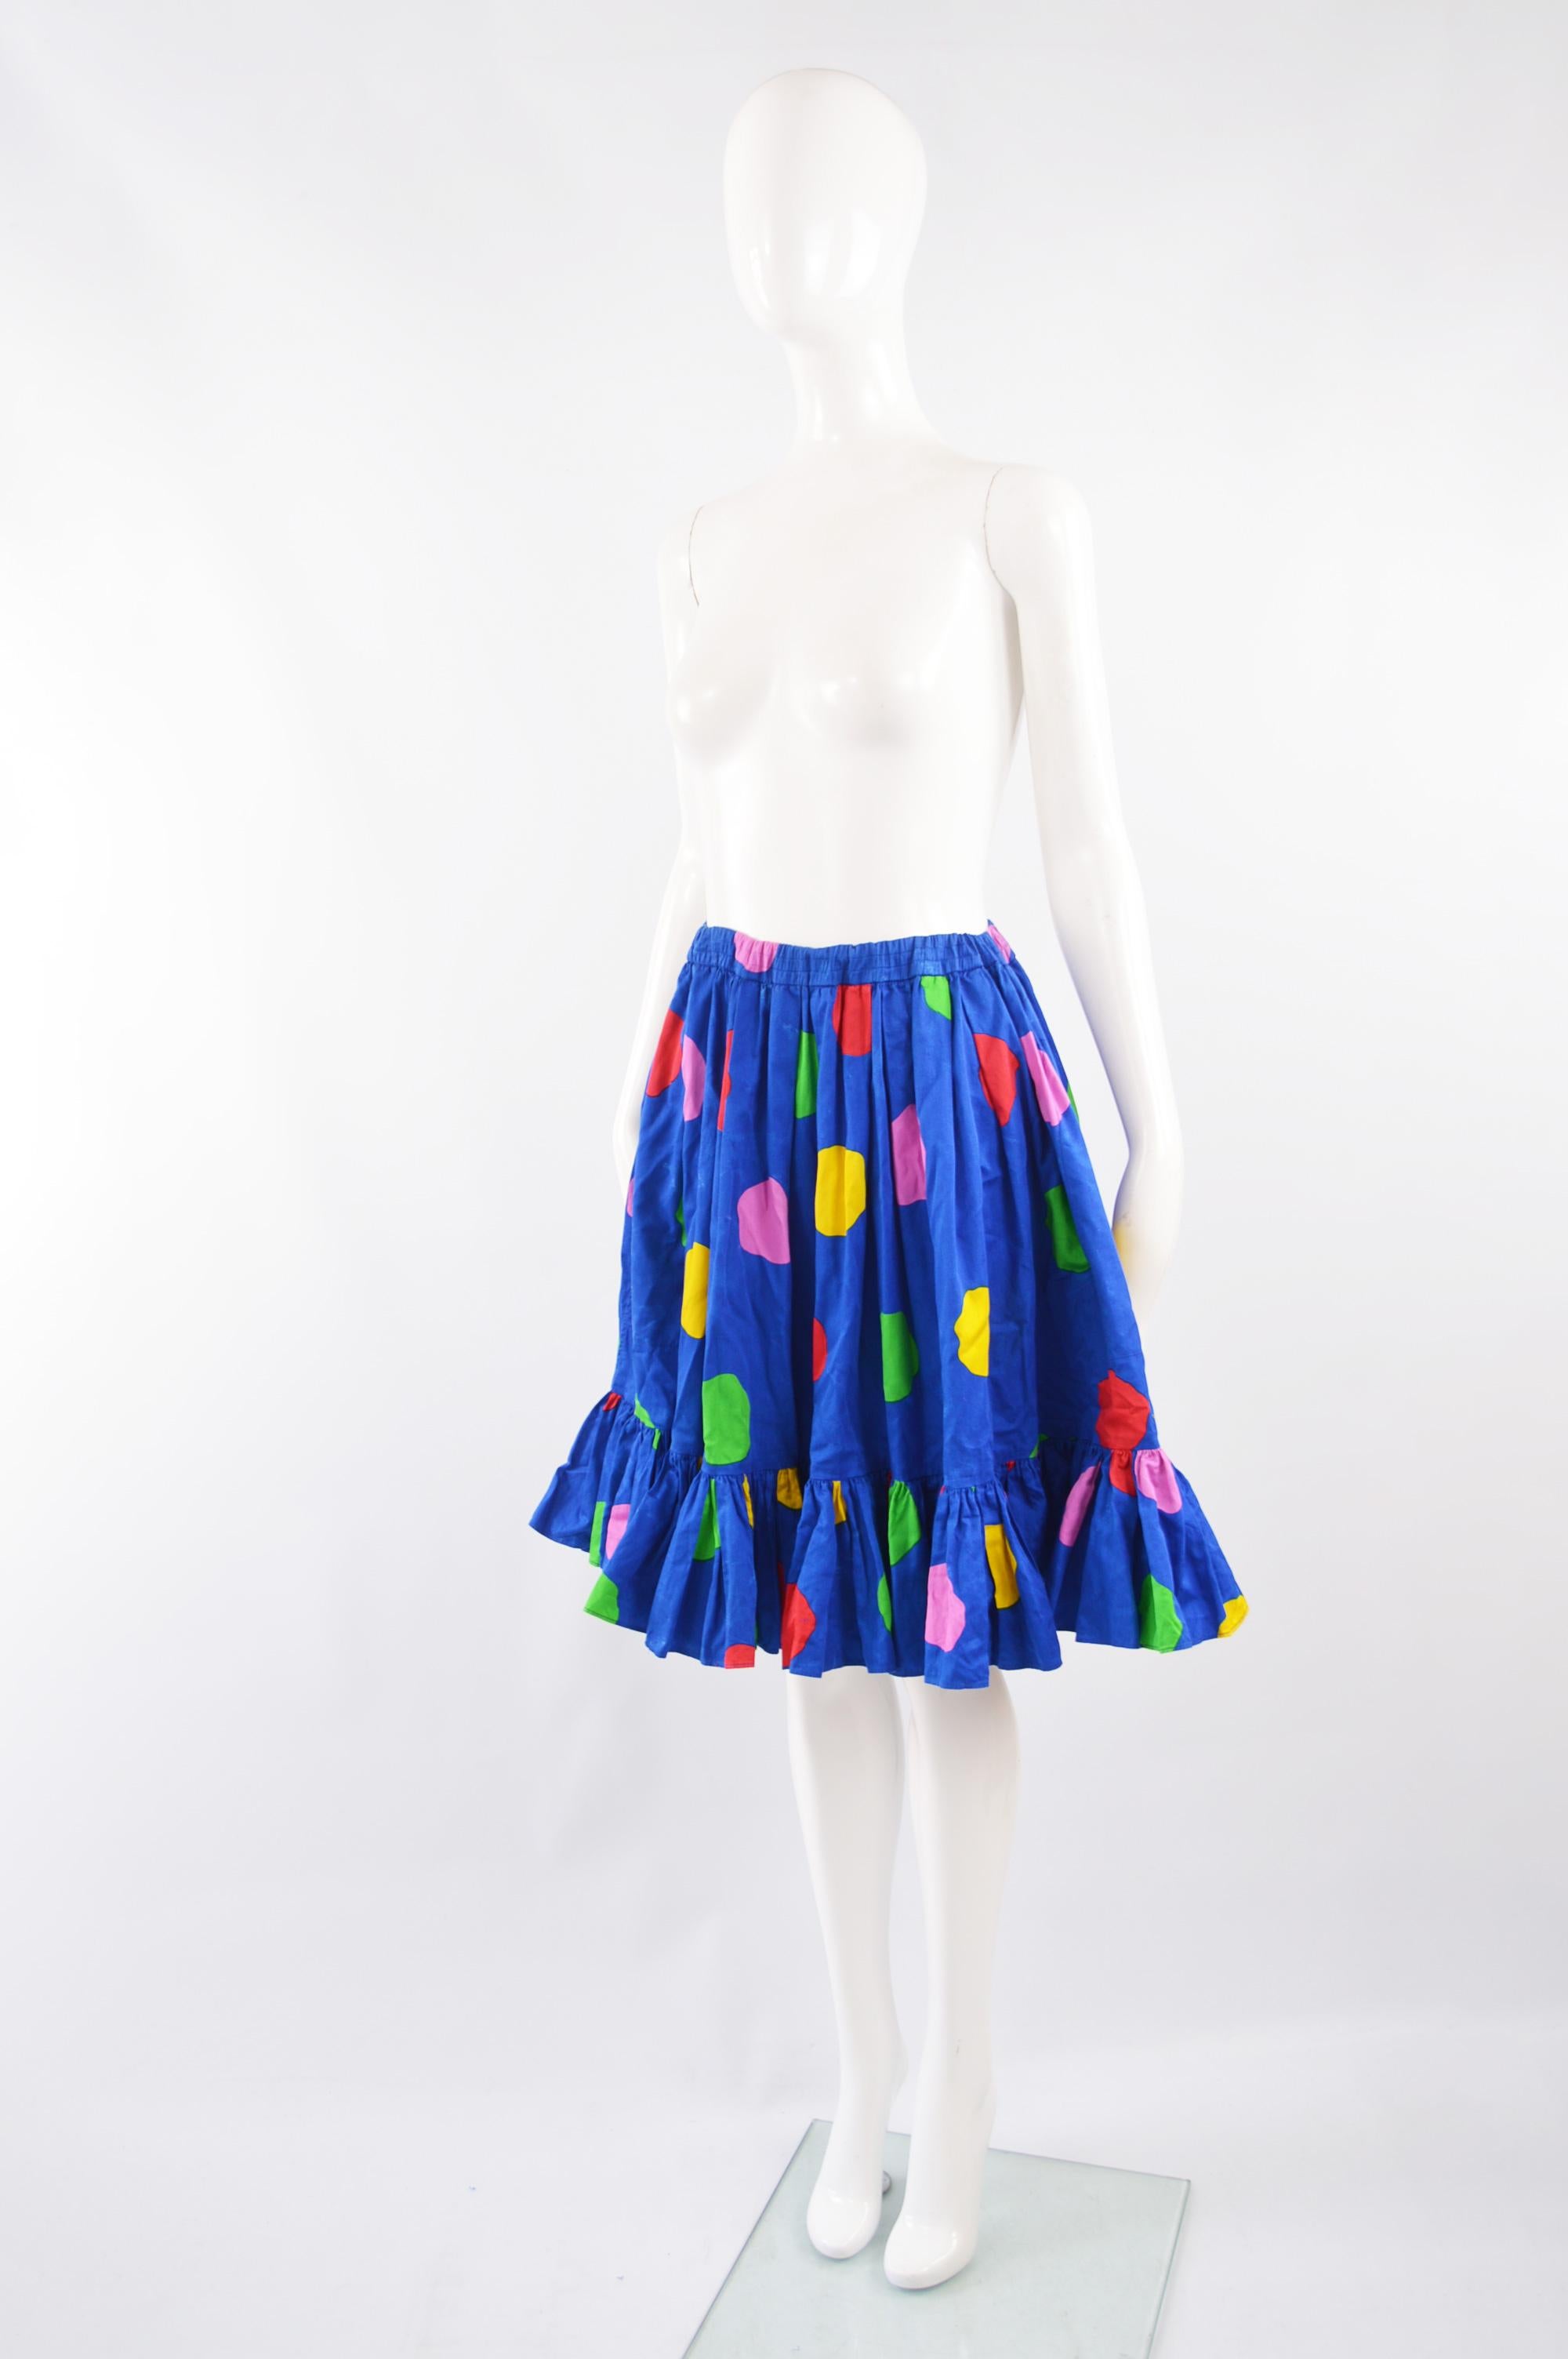 Yves Saint Laurent Vintage Polka Dot Skirt In Good Condition For Sale In Doncaster, South Yorkshire